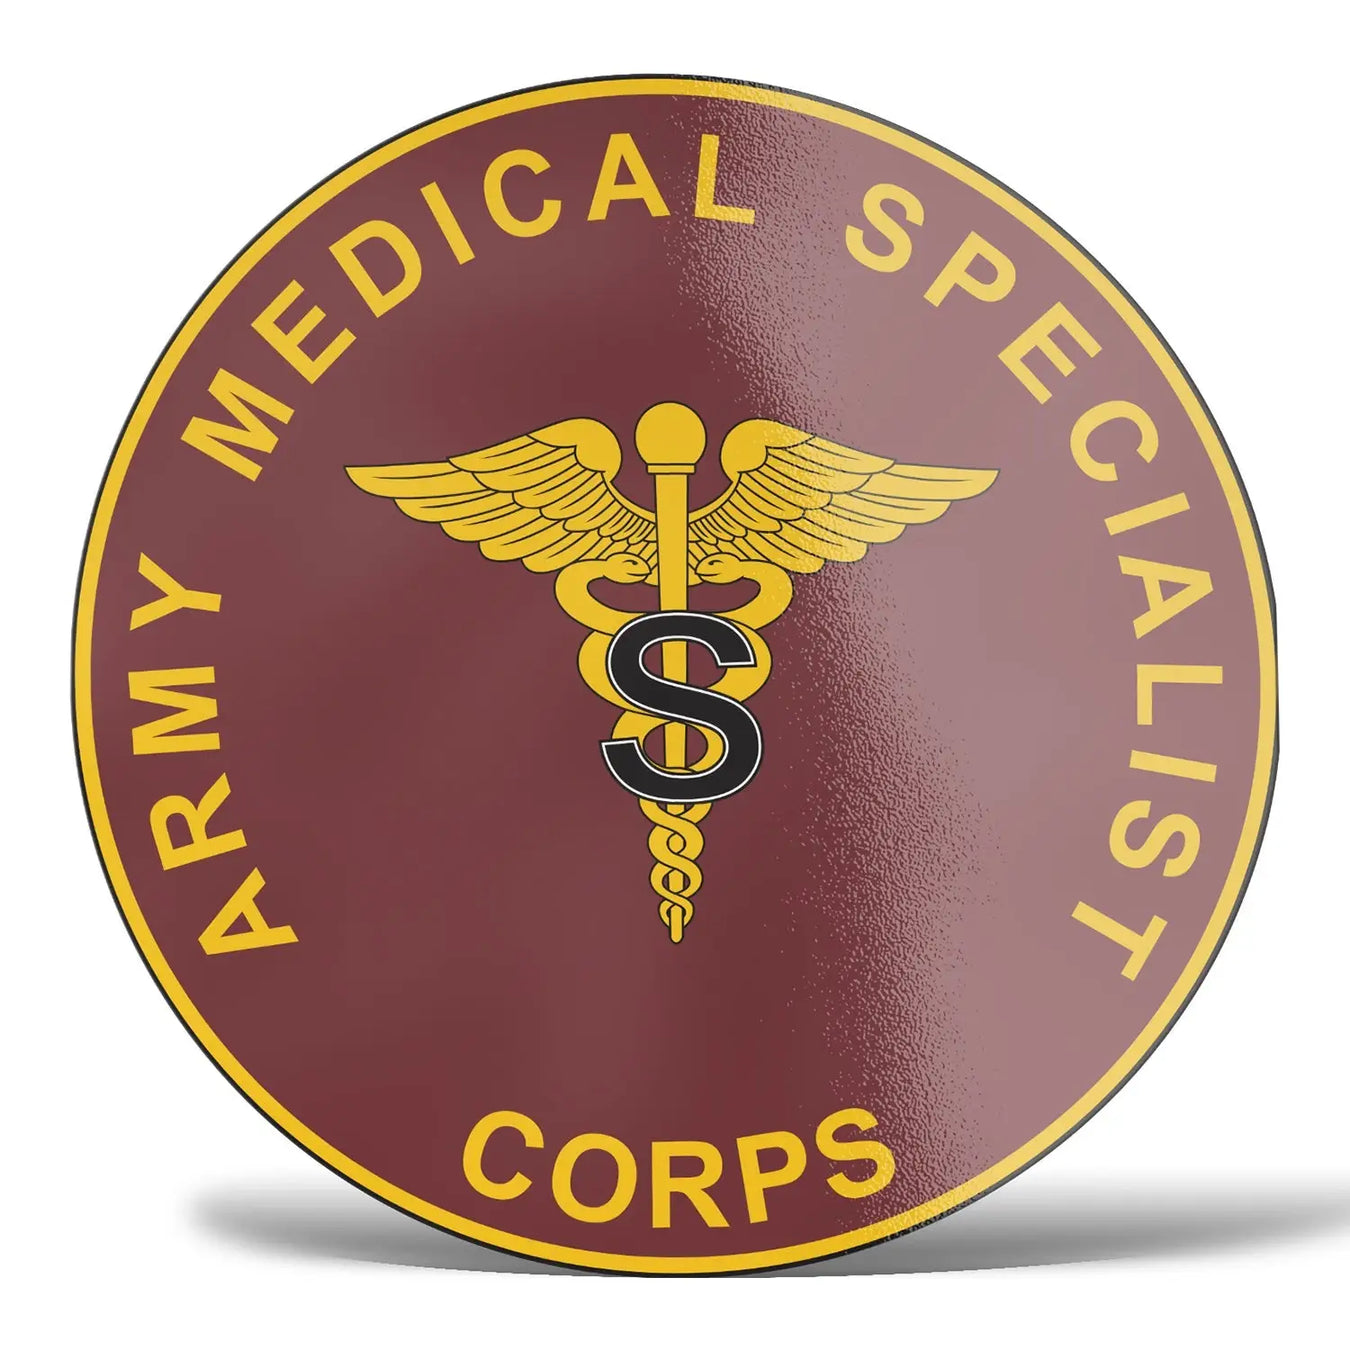 U.S. Army Medical Specialist Corps Decals